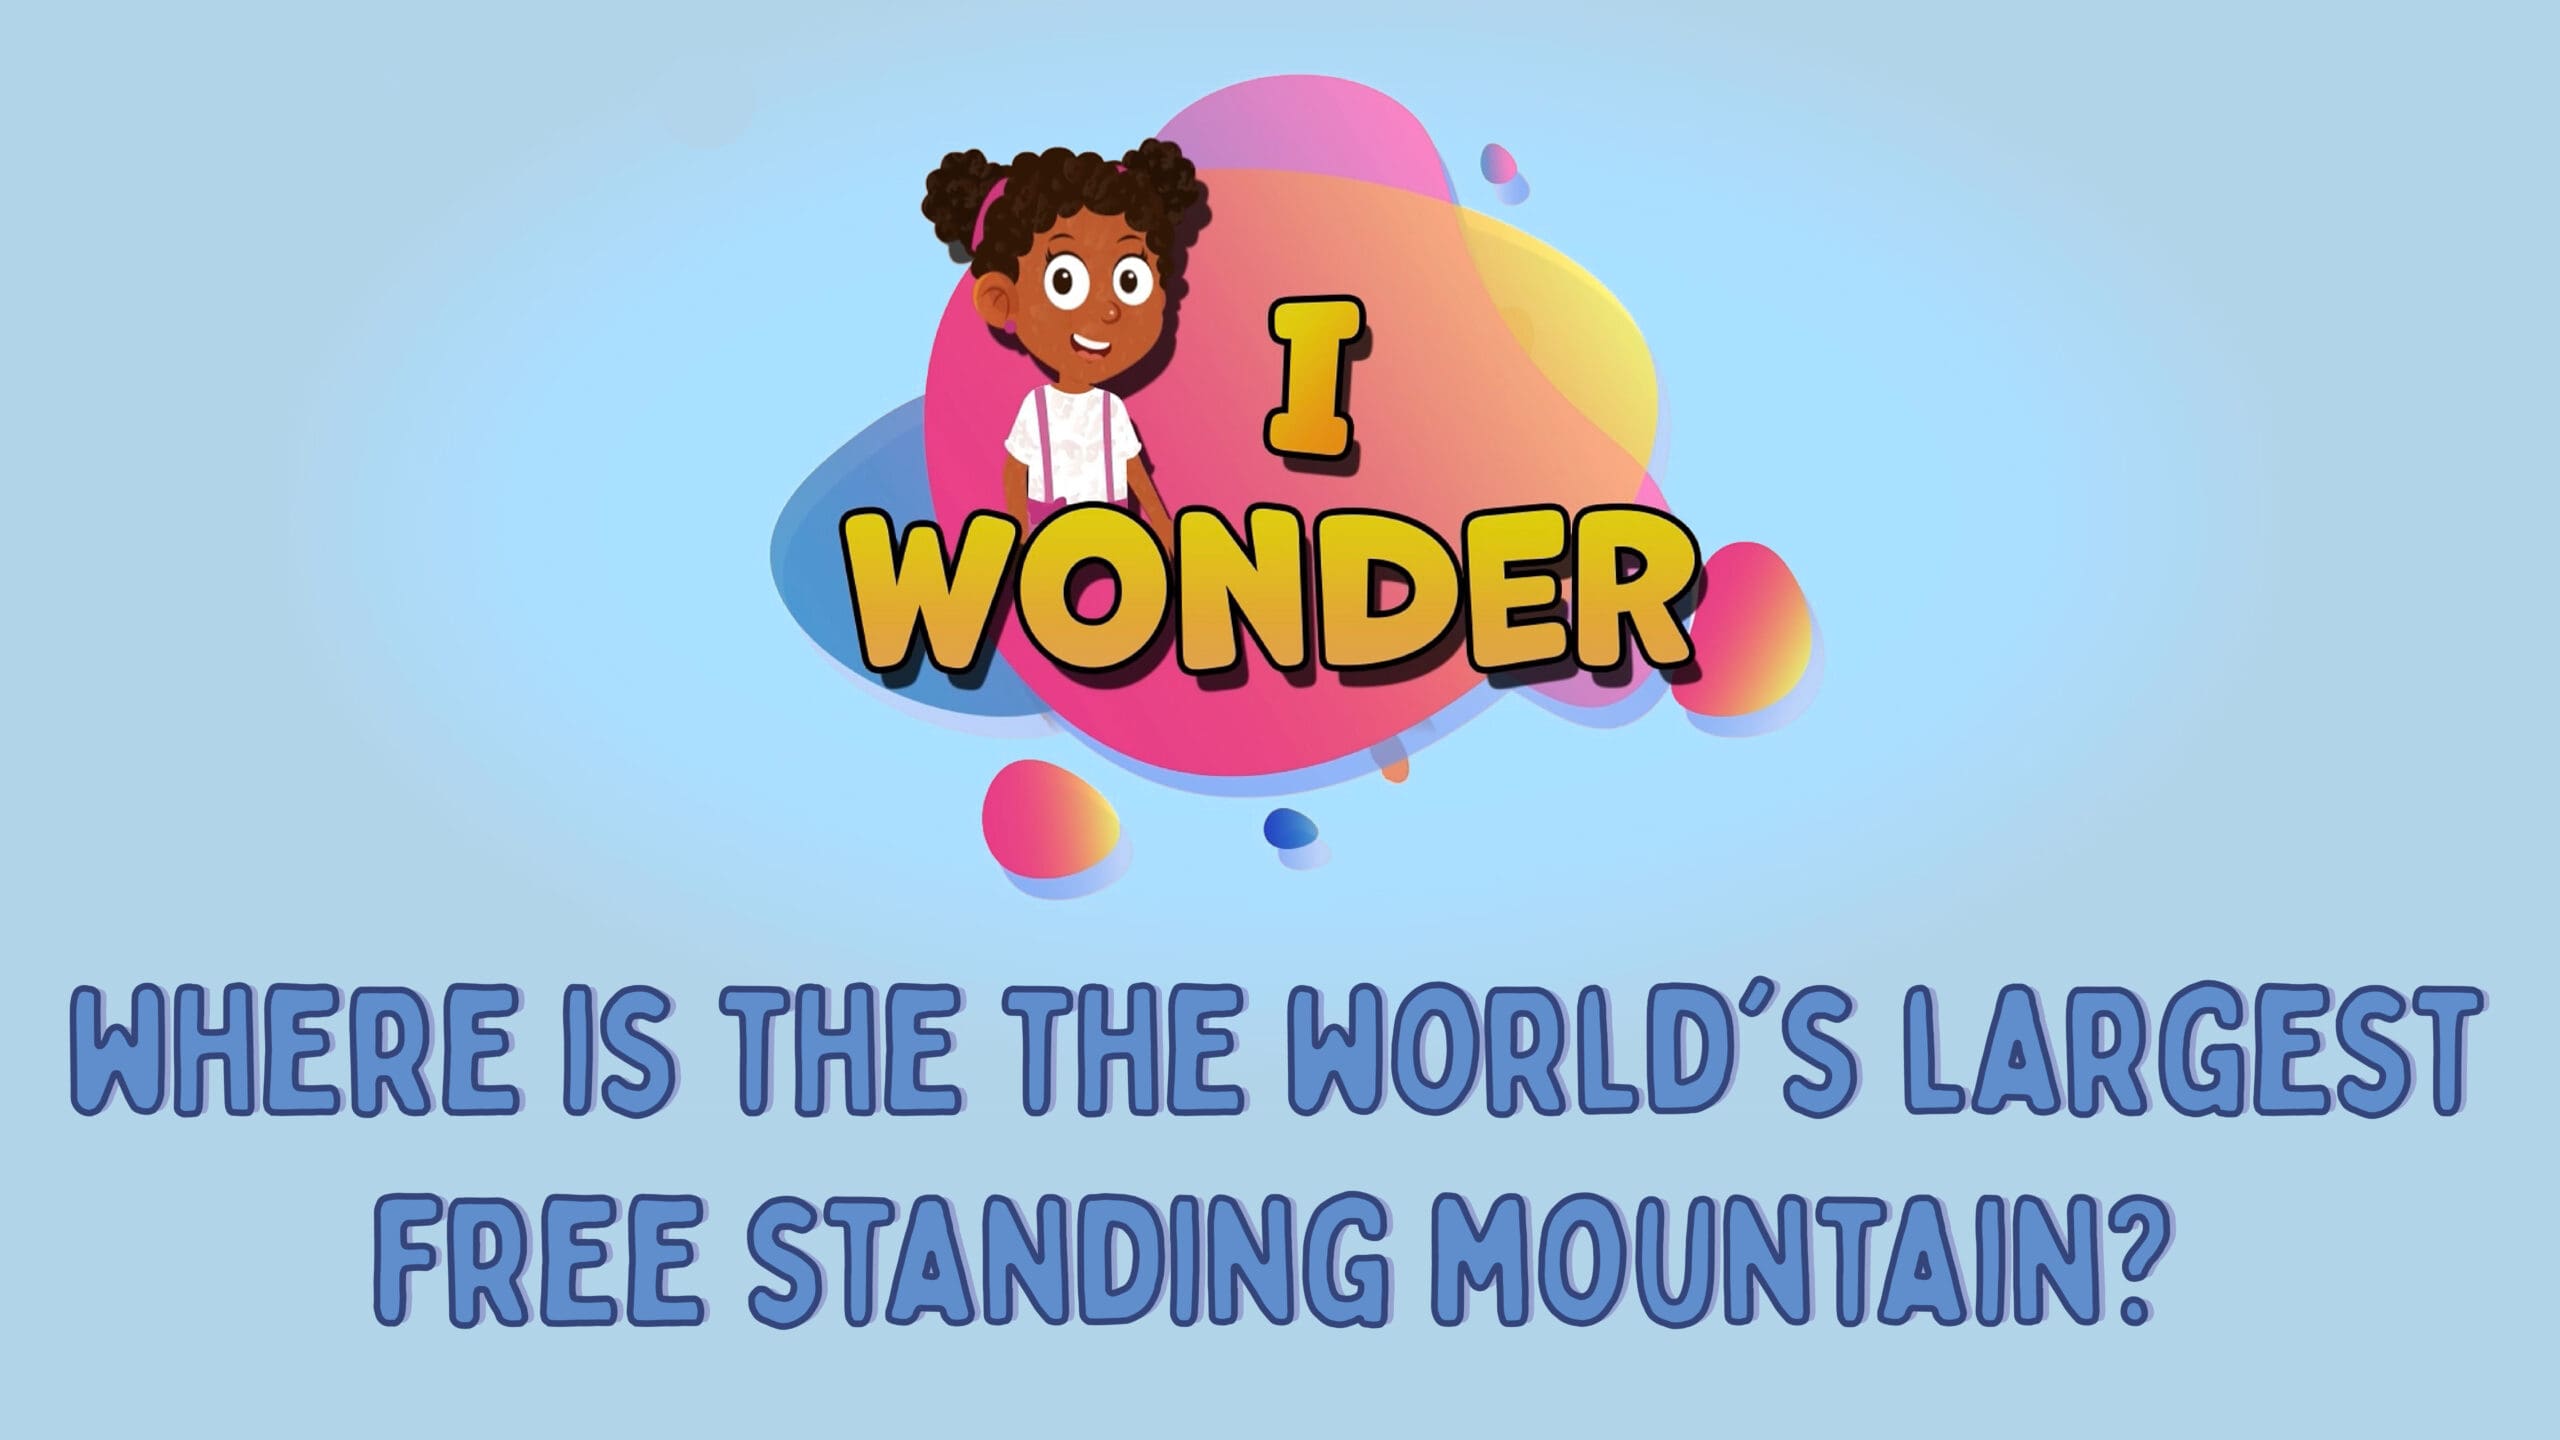 Where Is The World’s Largest Freestanding Mountain?